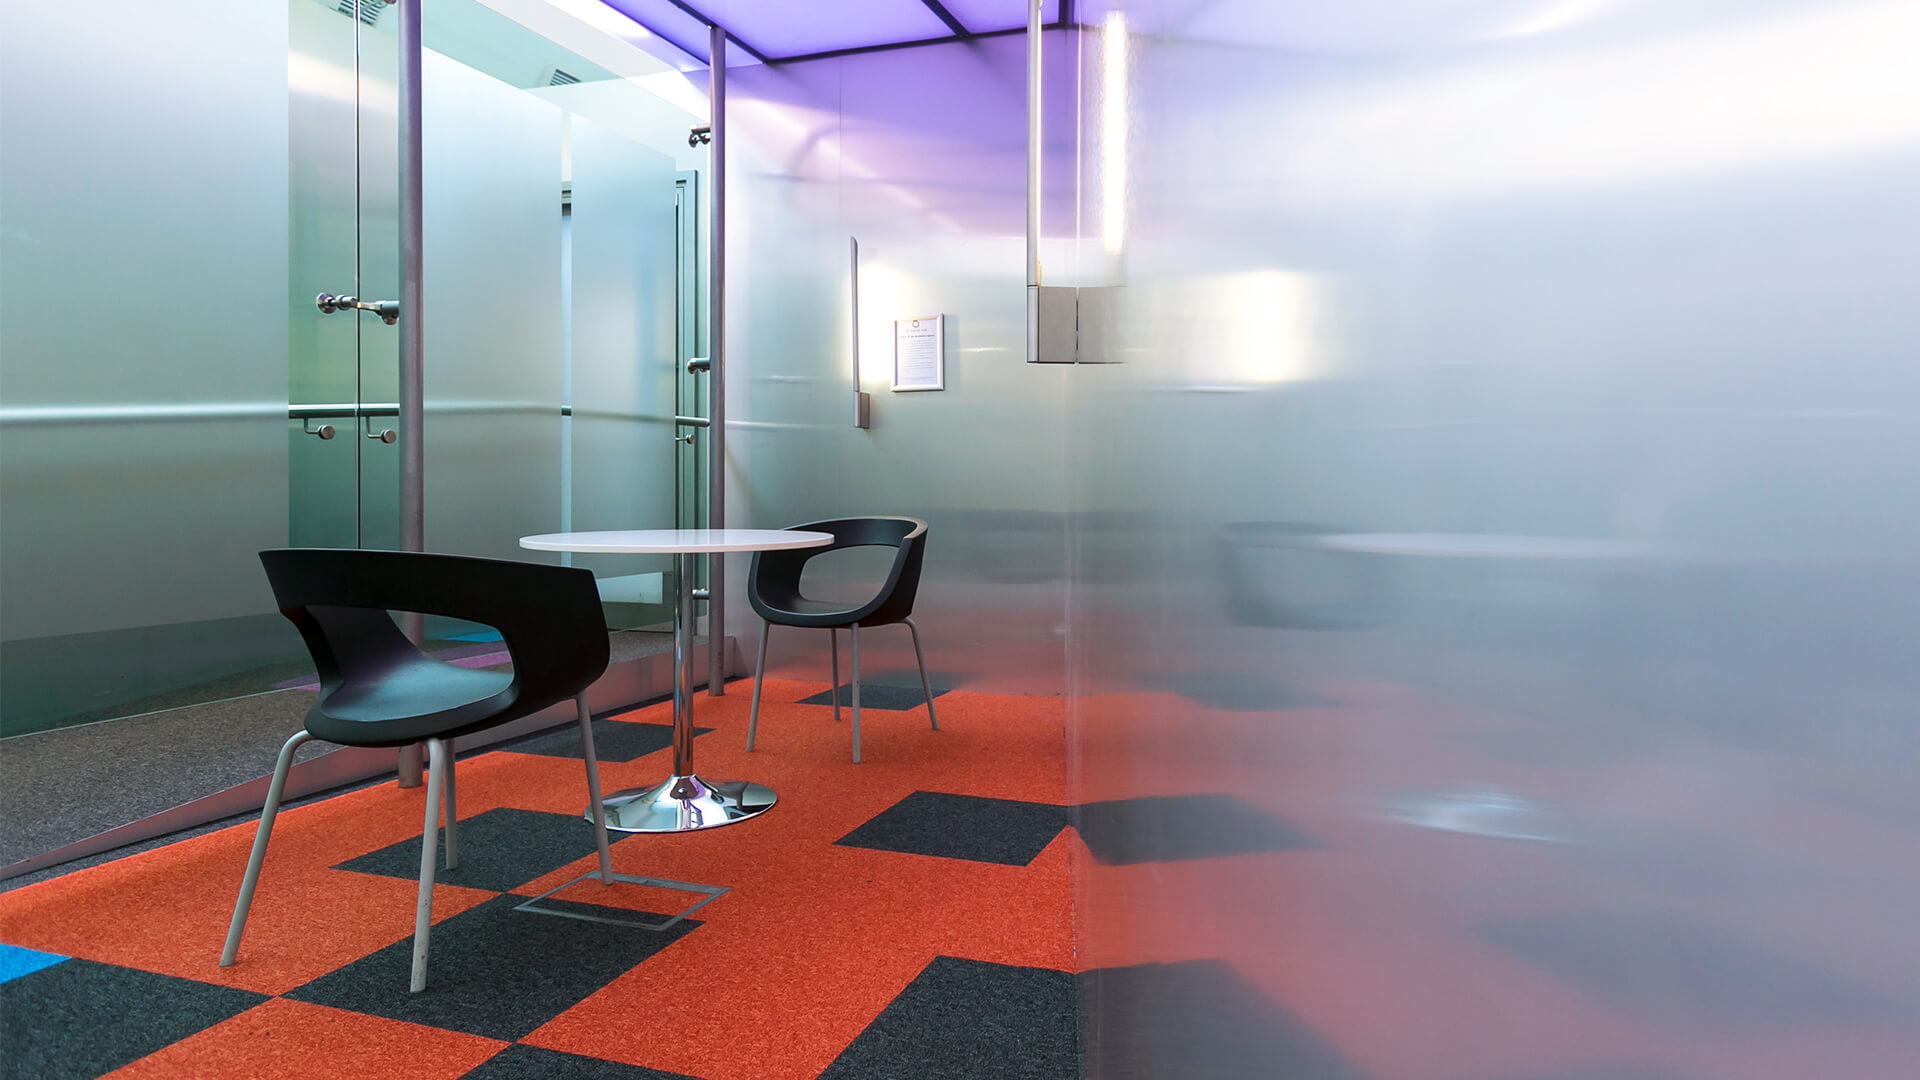 Glass and brushed steel walls enclose a bright breakout meeting space with a table and chairs